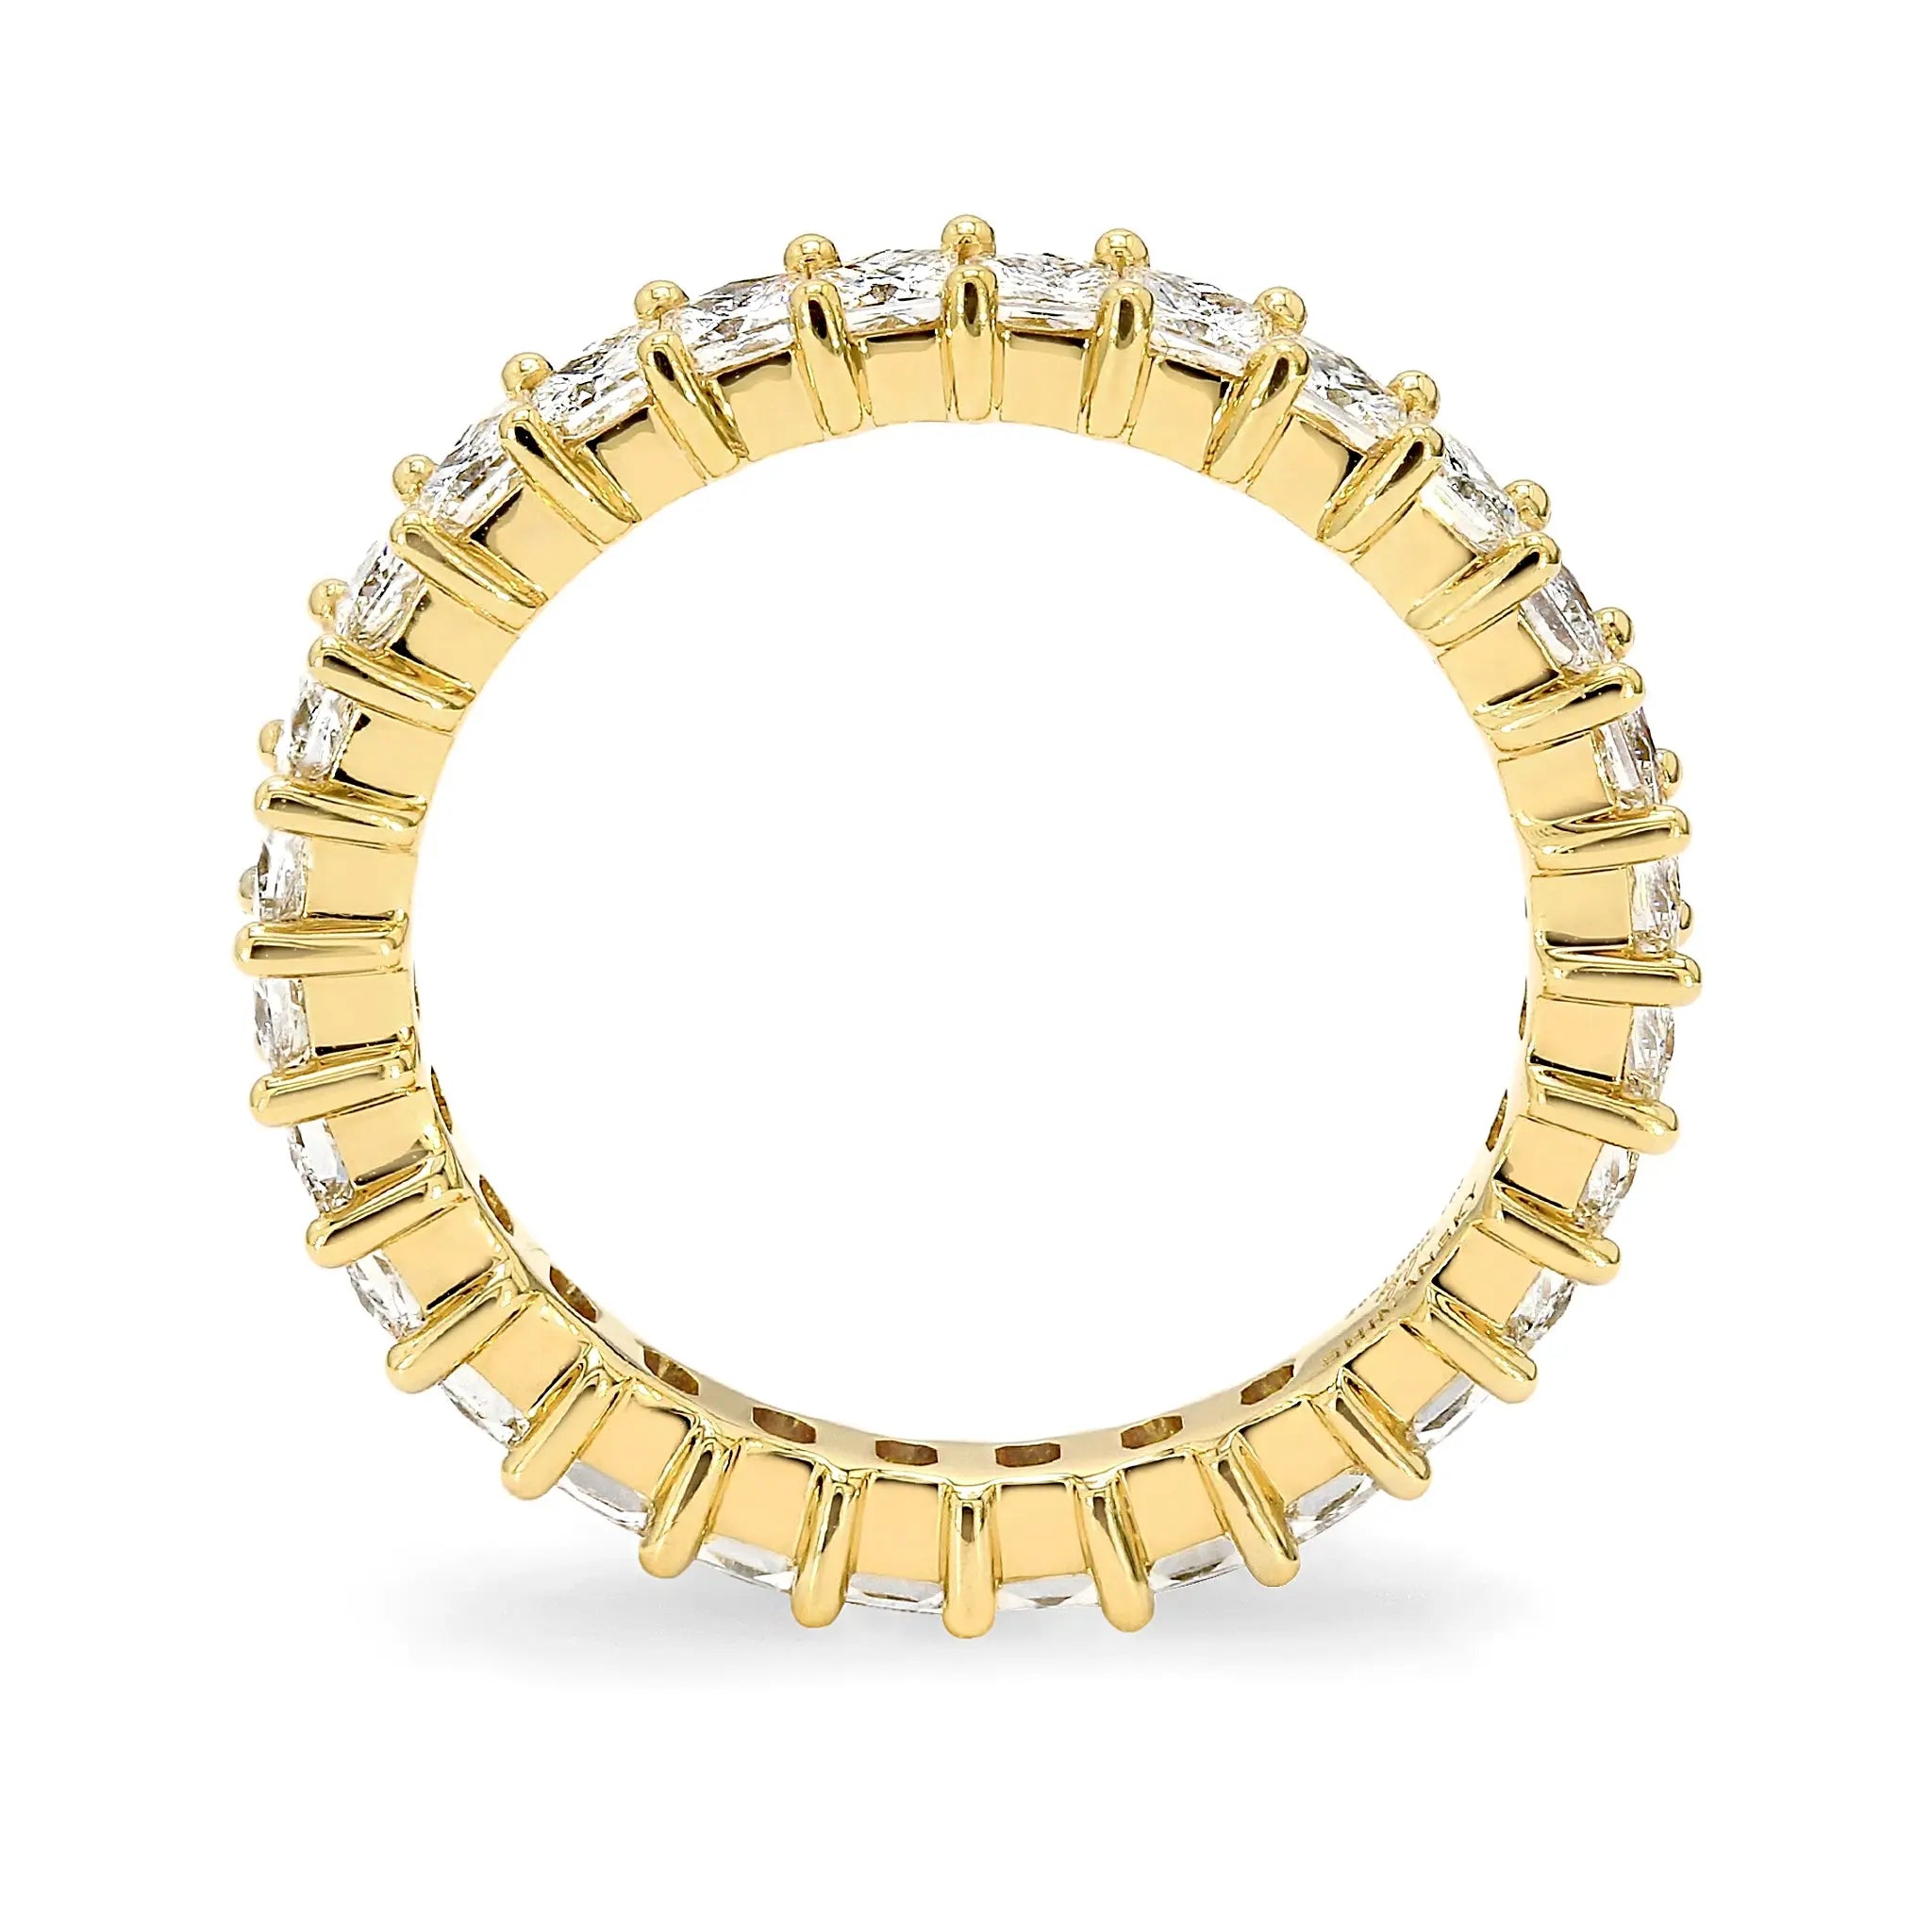 Shimansky - My Girl Claw set Full Eternity Diamond Ring 2.00ct Crafted in 18K Yellow Gold